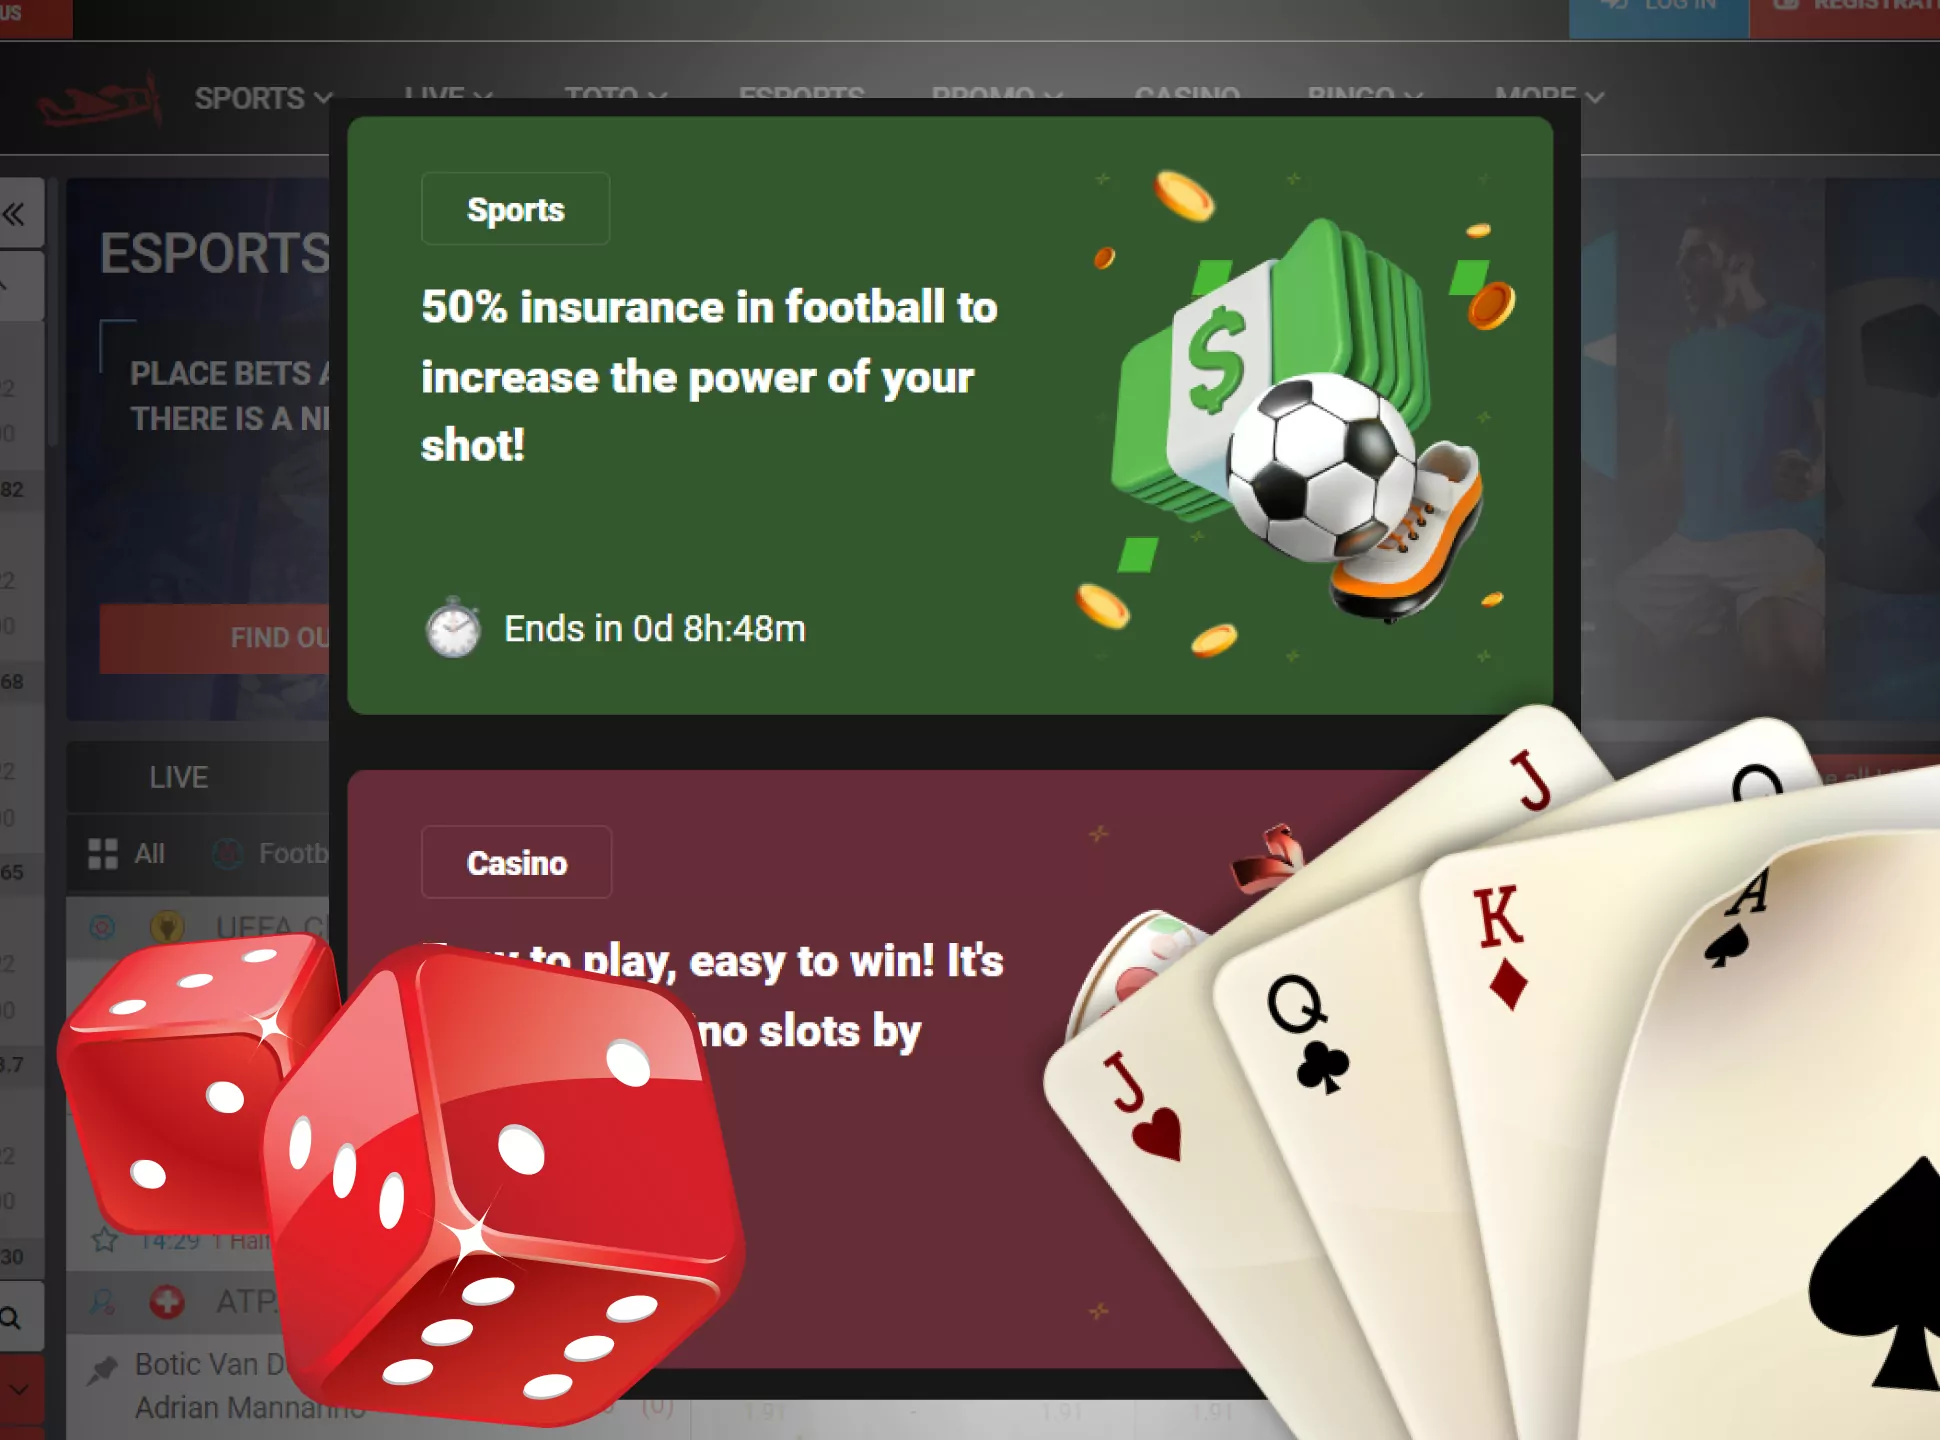 Register at an online casino, top up the account, choose a bonus and activate it.